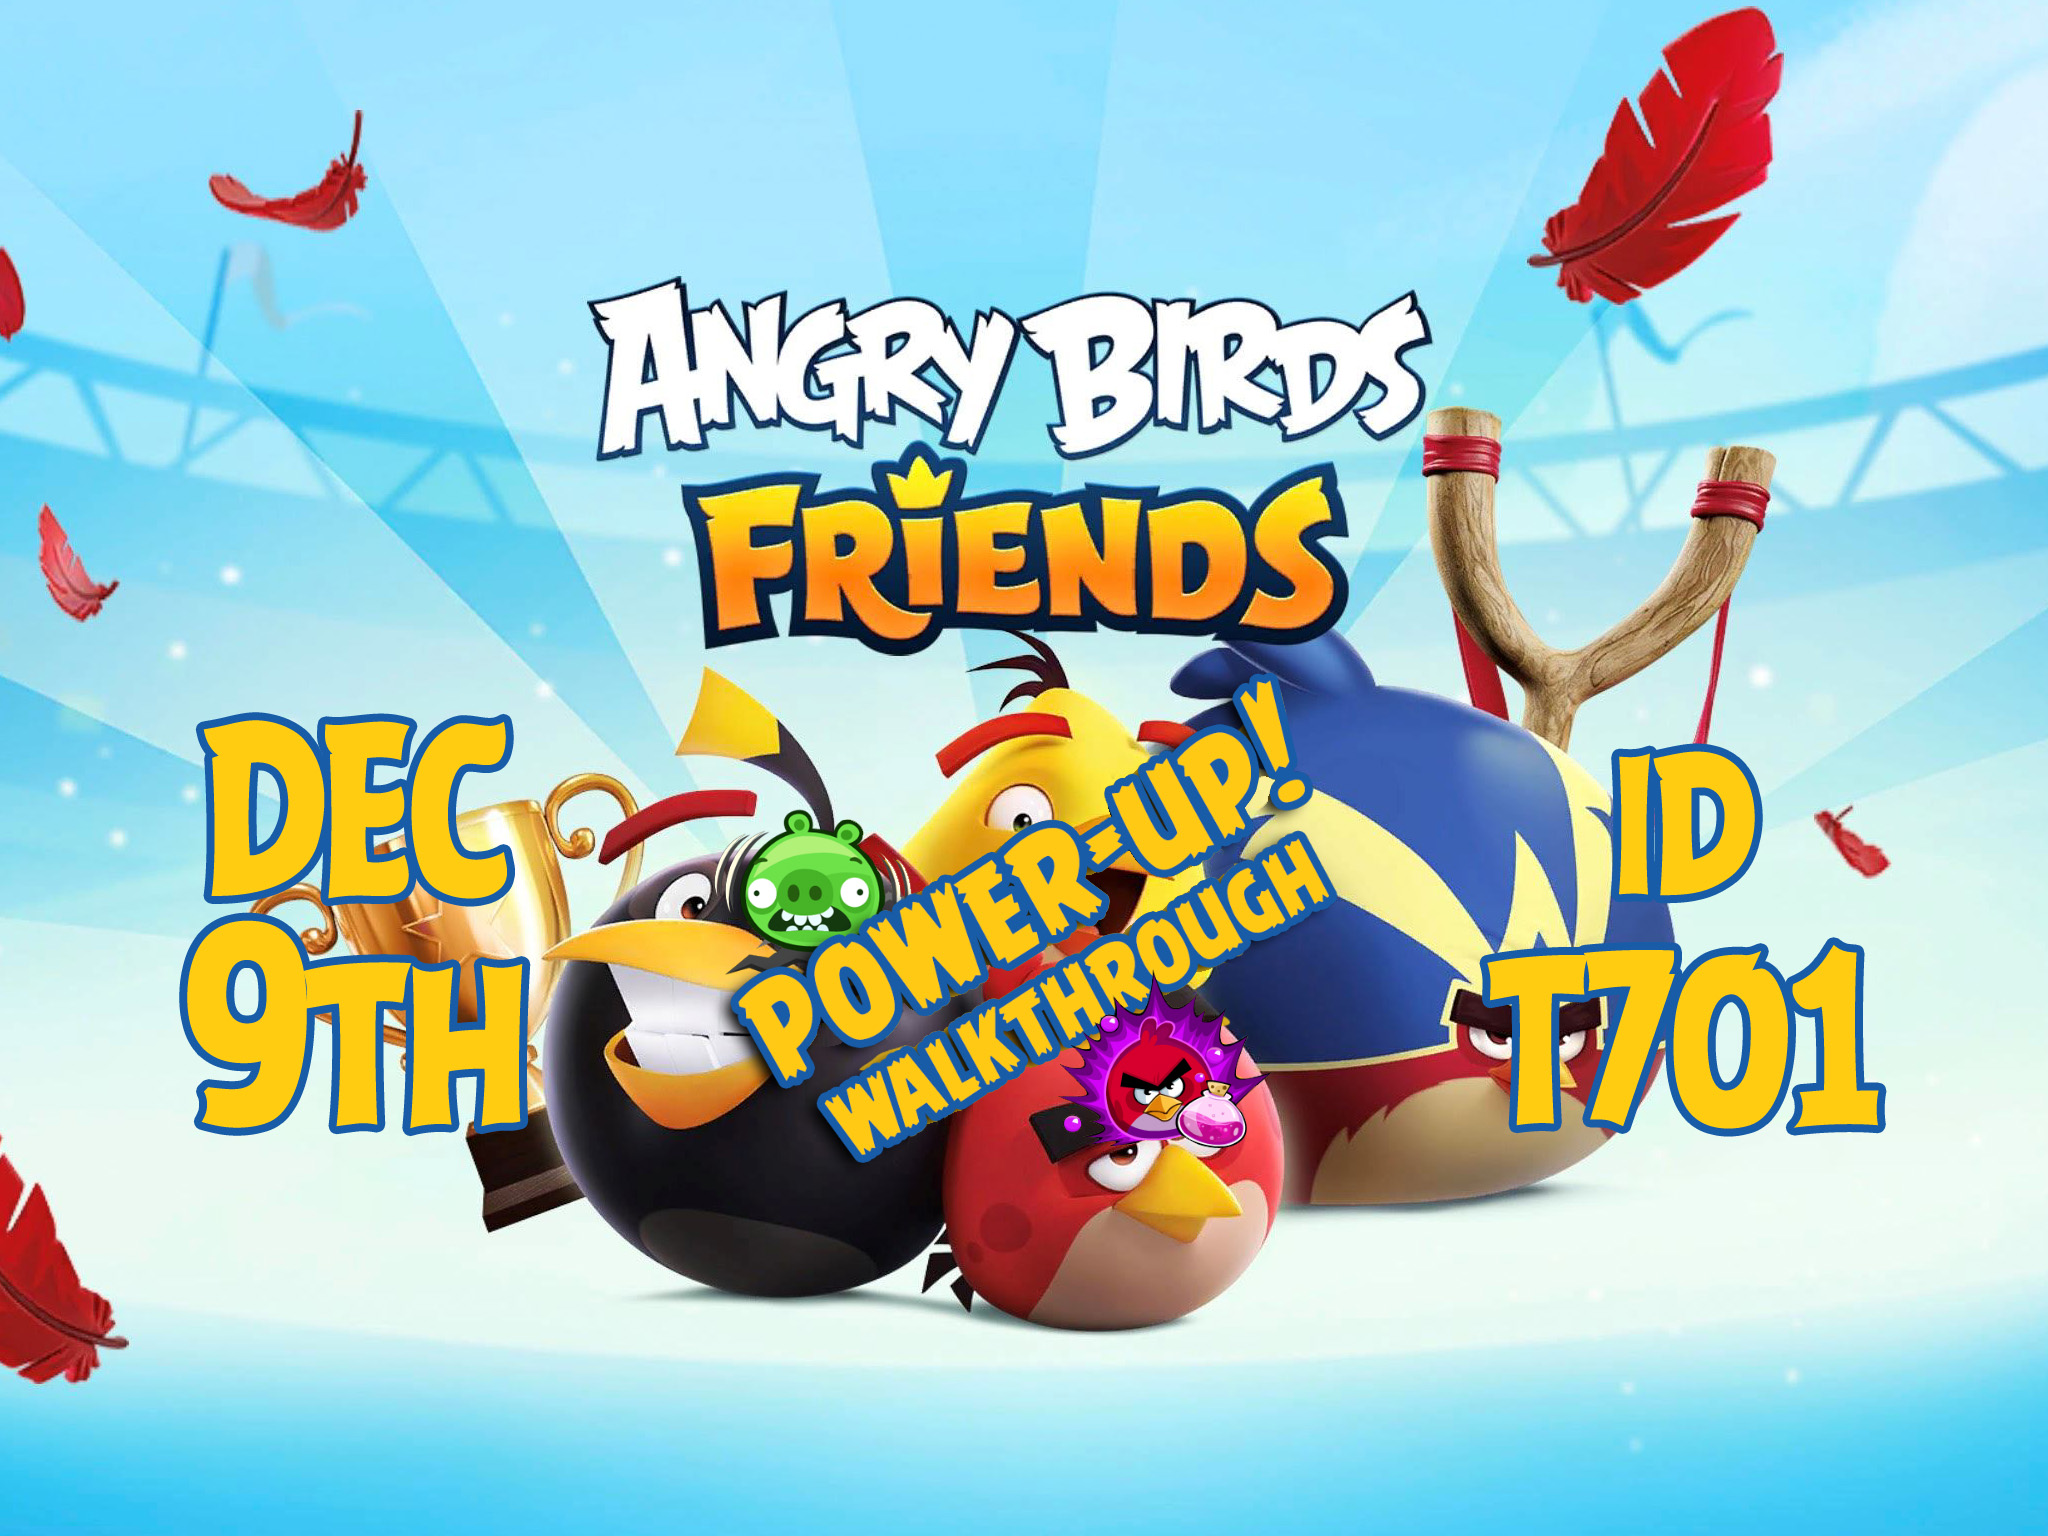 angry birds friends 2018 tournament 311-b